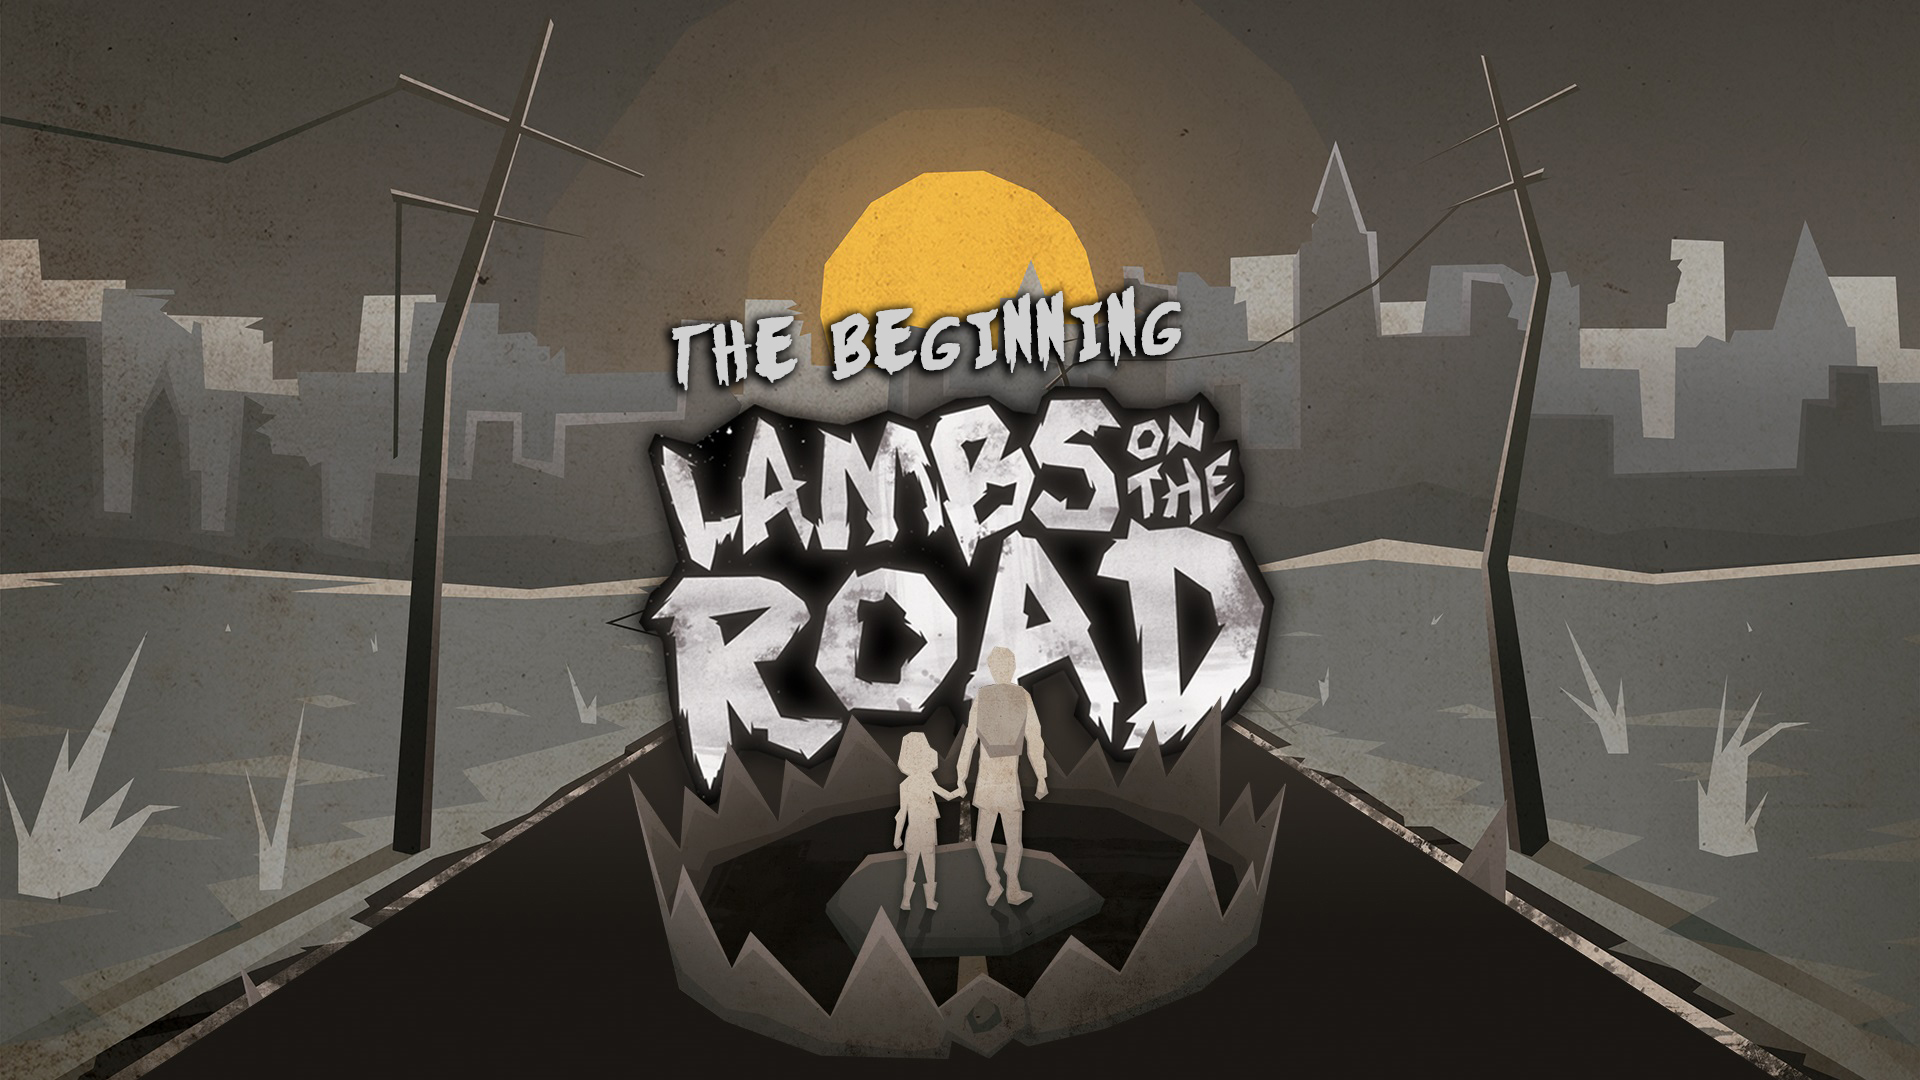 Lambs on the road : The Beginning